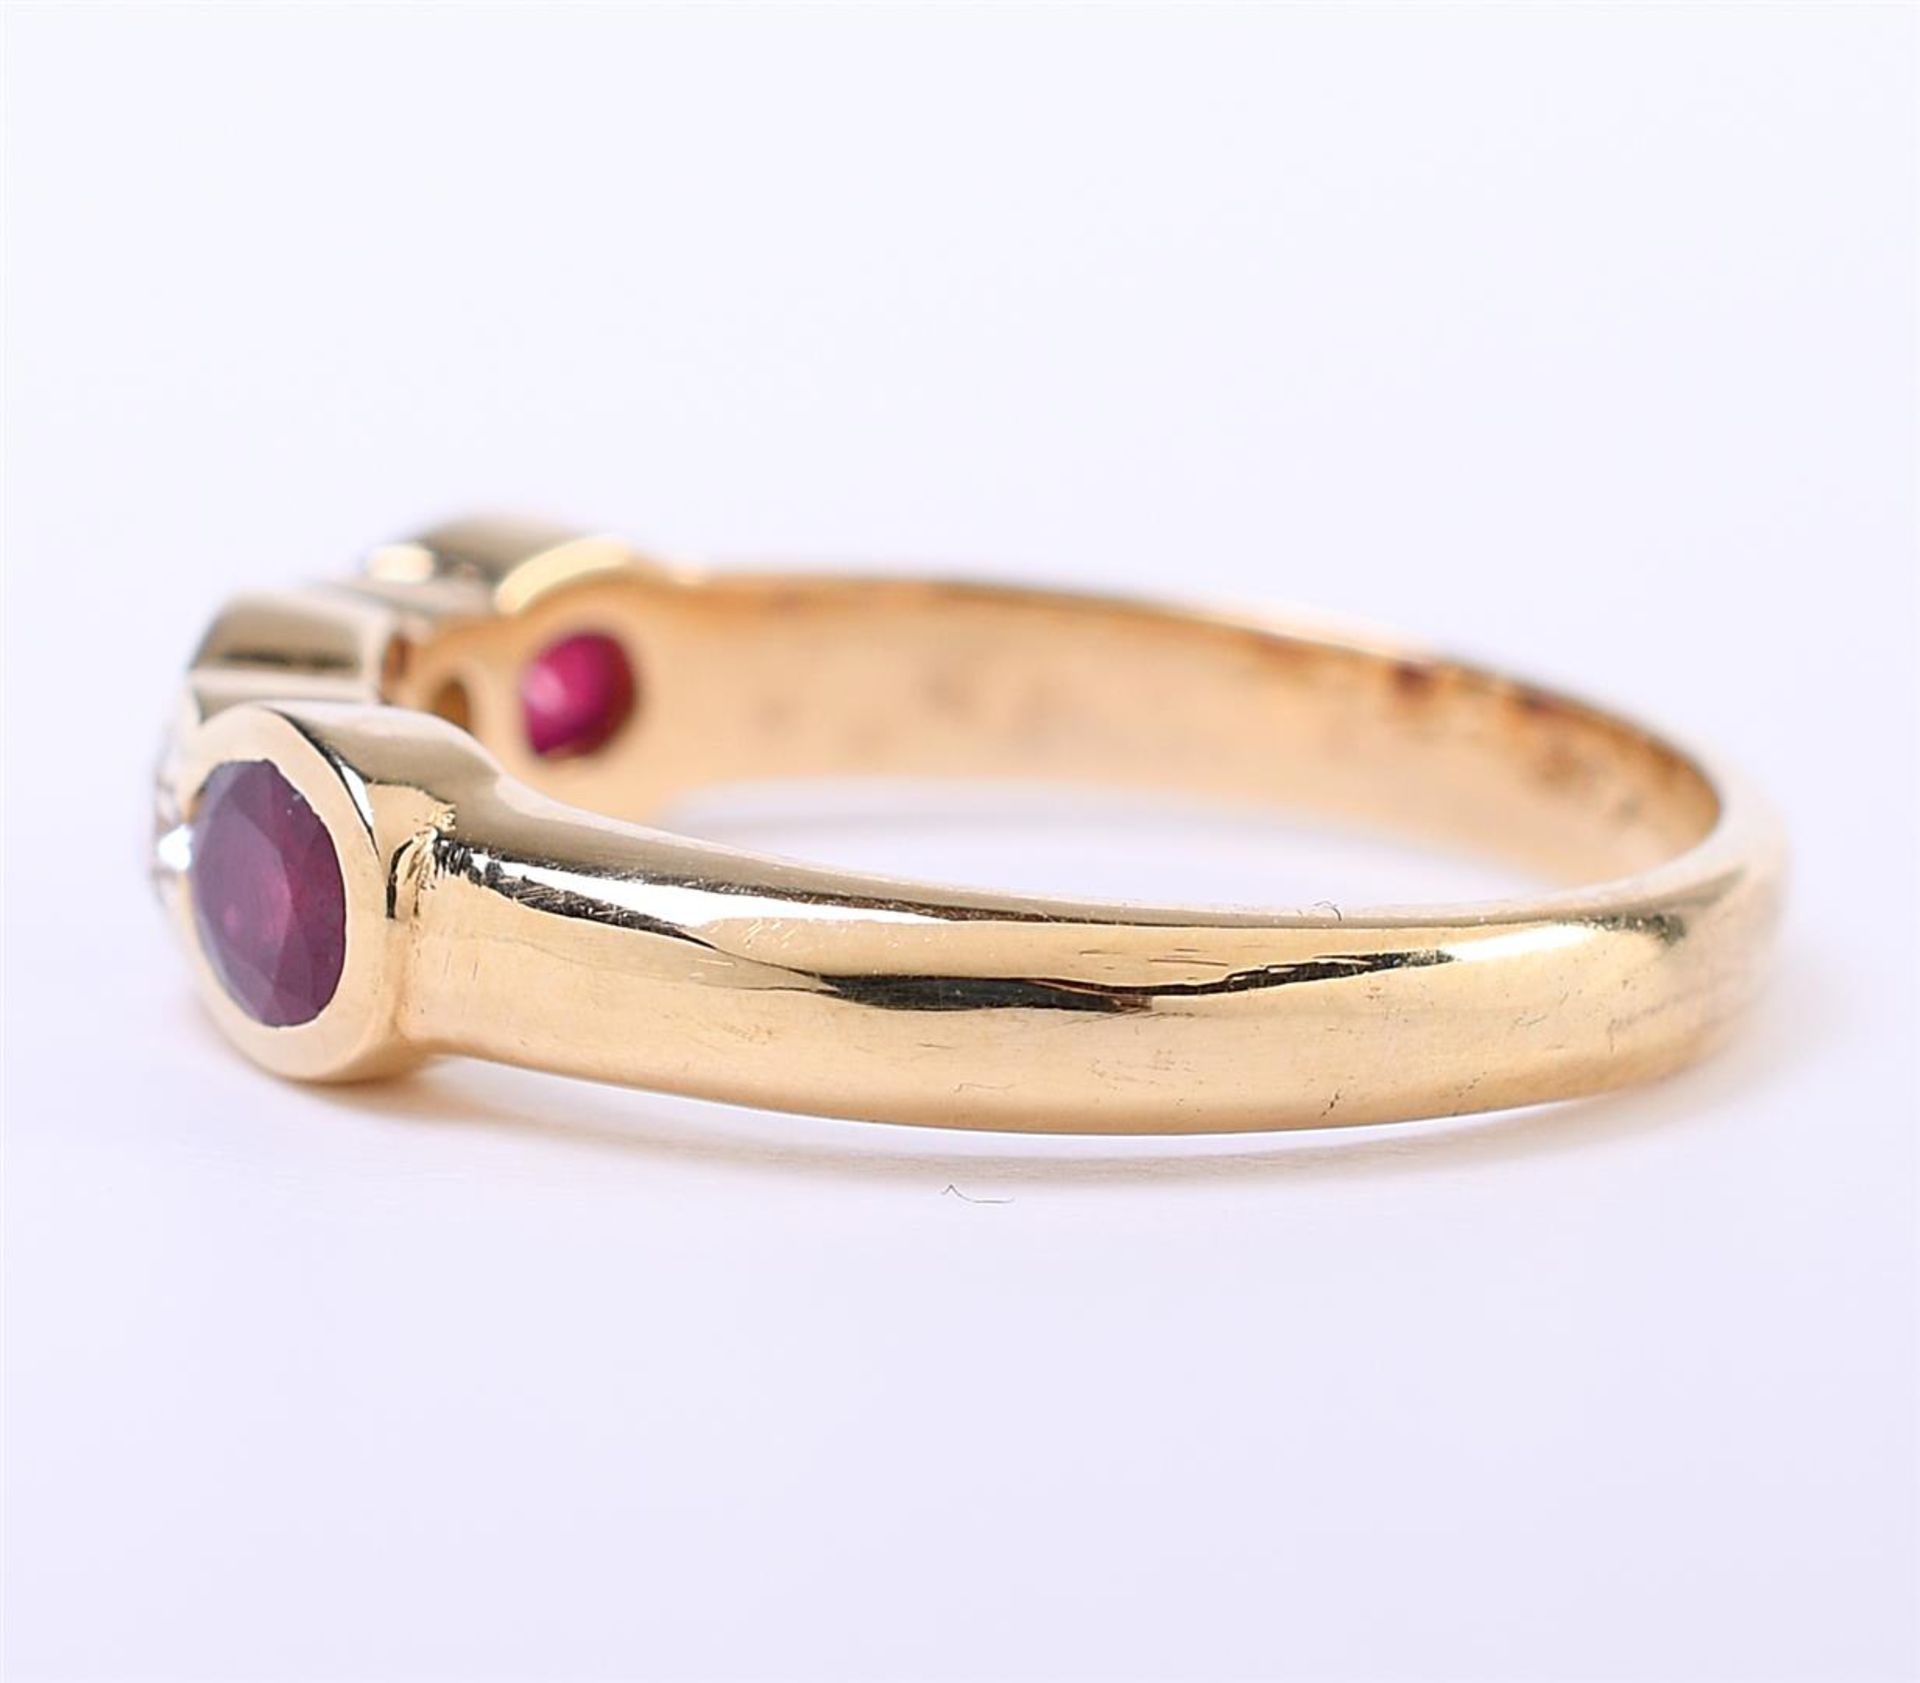 18 carat yellow gold ladies ring set with approximately 3 x oval cut rubies - Image 3 of 5